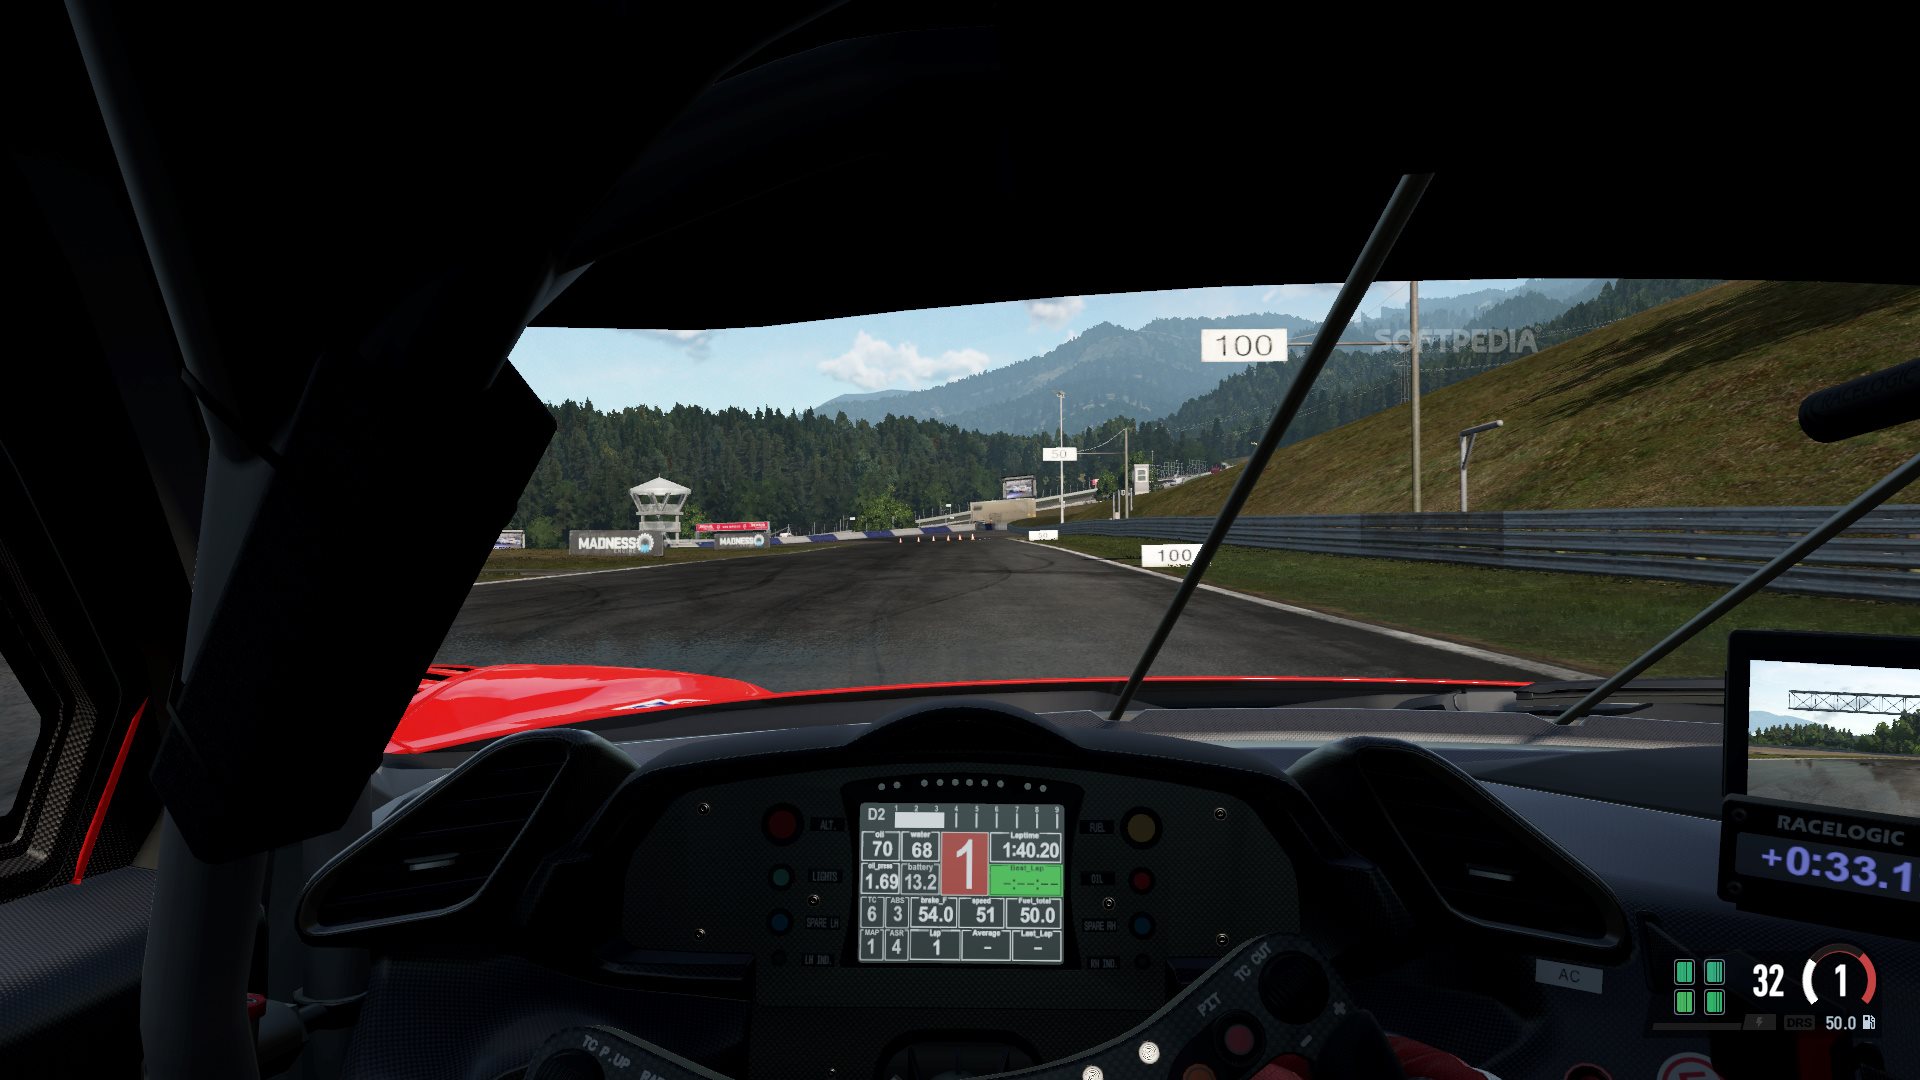 project cars pc demo